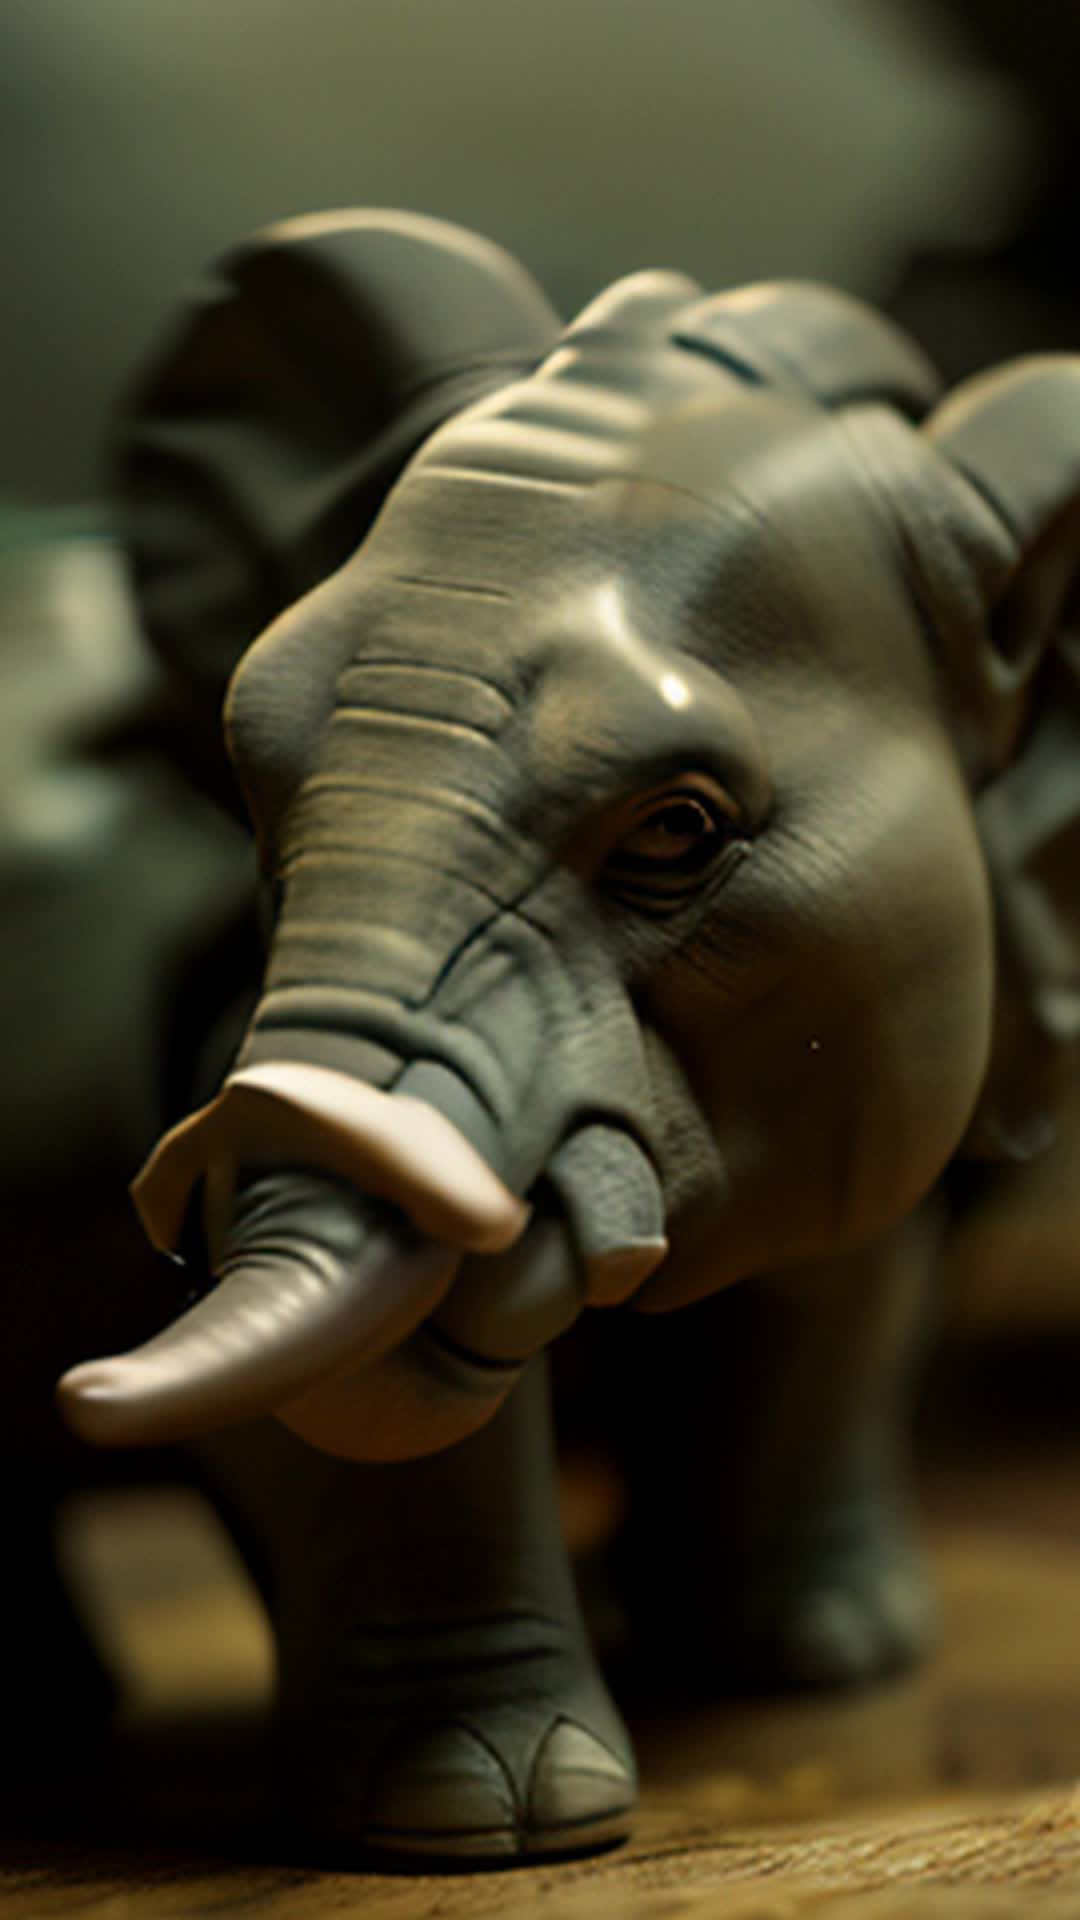 Jamal sculpting clay elephant, silent resilience, excitement sparkling in eyes, expertly shaping basic symbolic form, revealing hidden talent, quiet confidence, illuminated studio, focused close-up, highly detailed and sharp focus